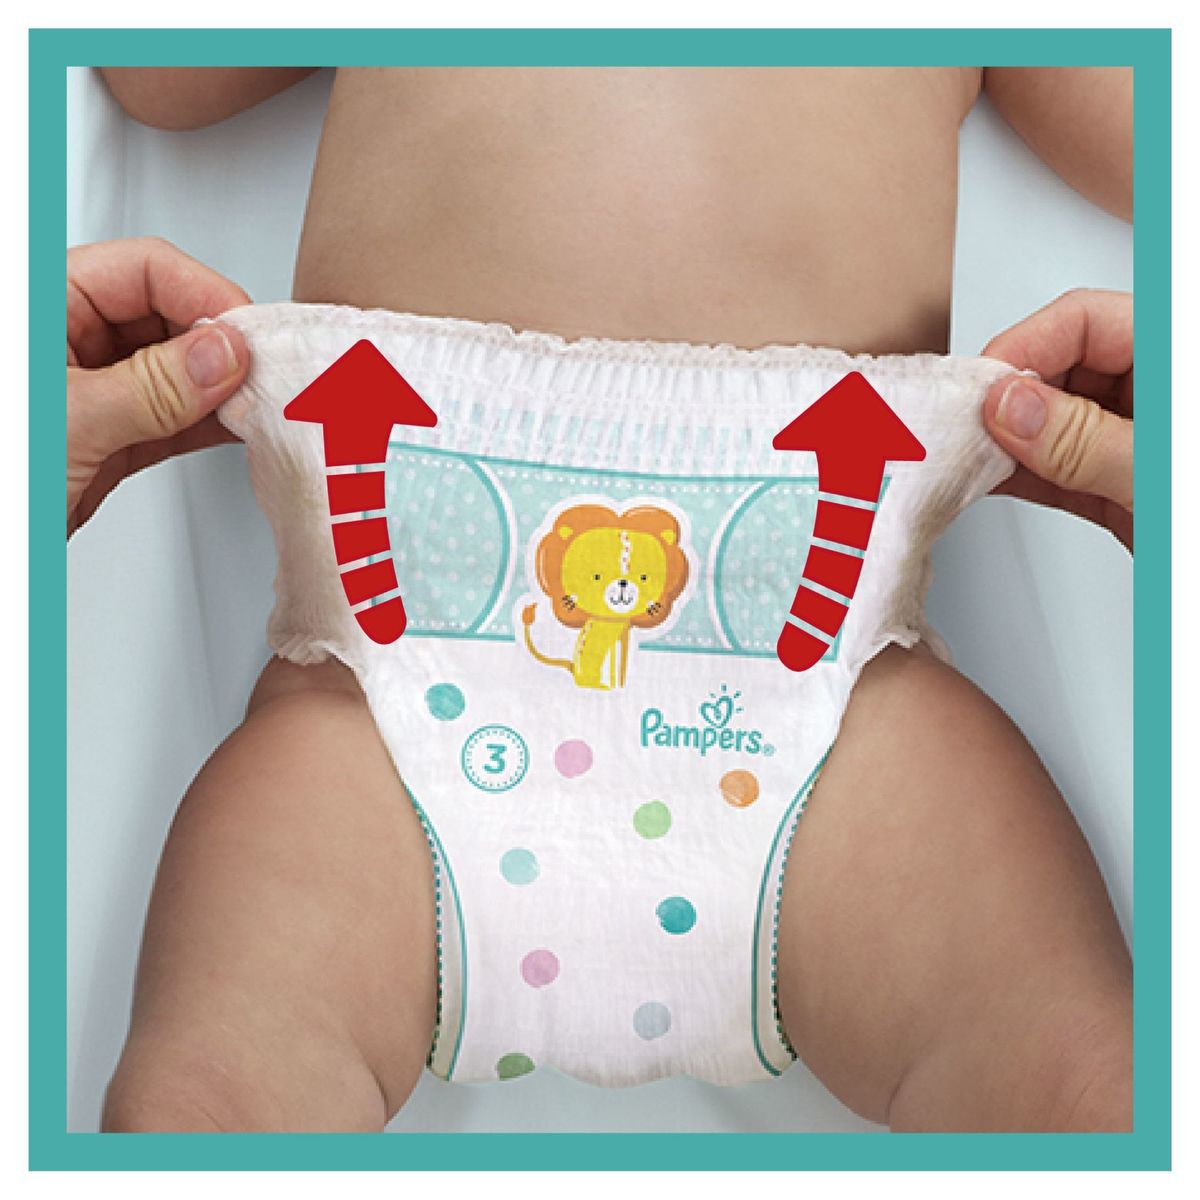 Pampers Baby-Dry Pants Couches-Culottes Taille 6, 20 Culottes, 15kg+